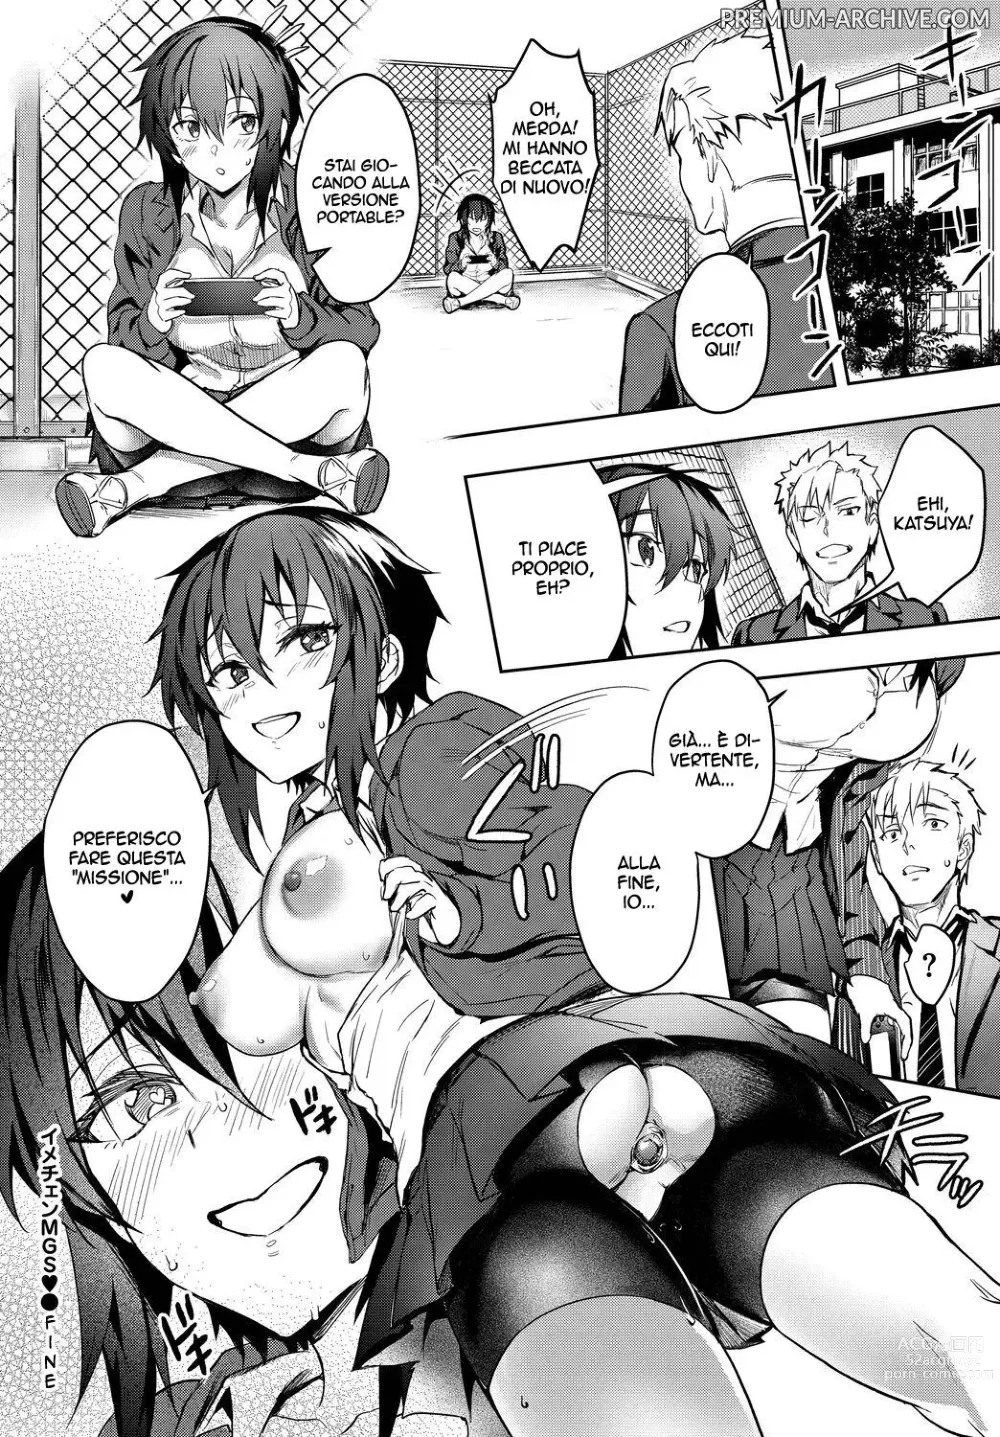 Page 38 of manga Missione Sesso